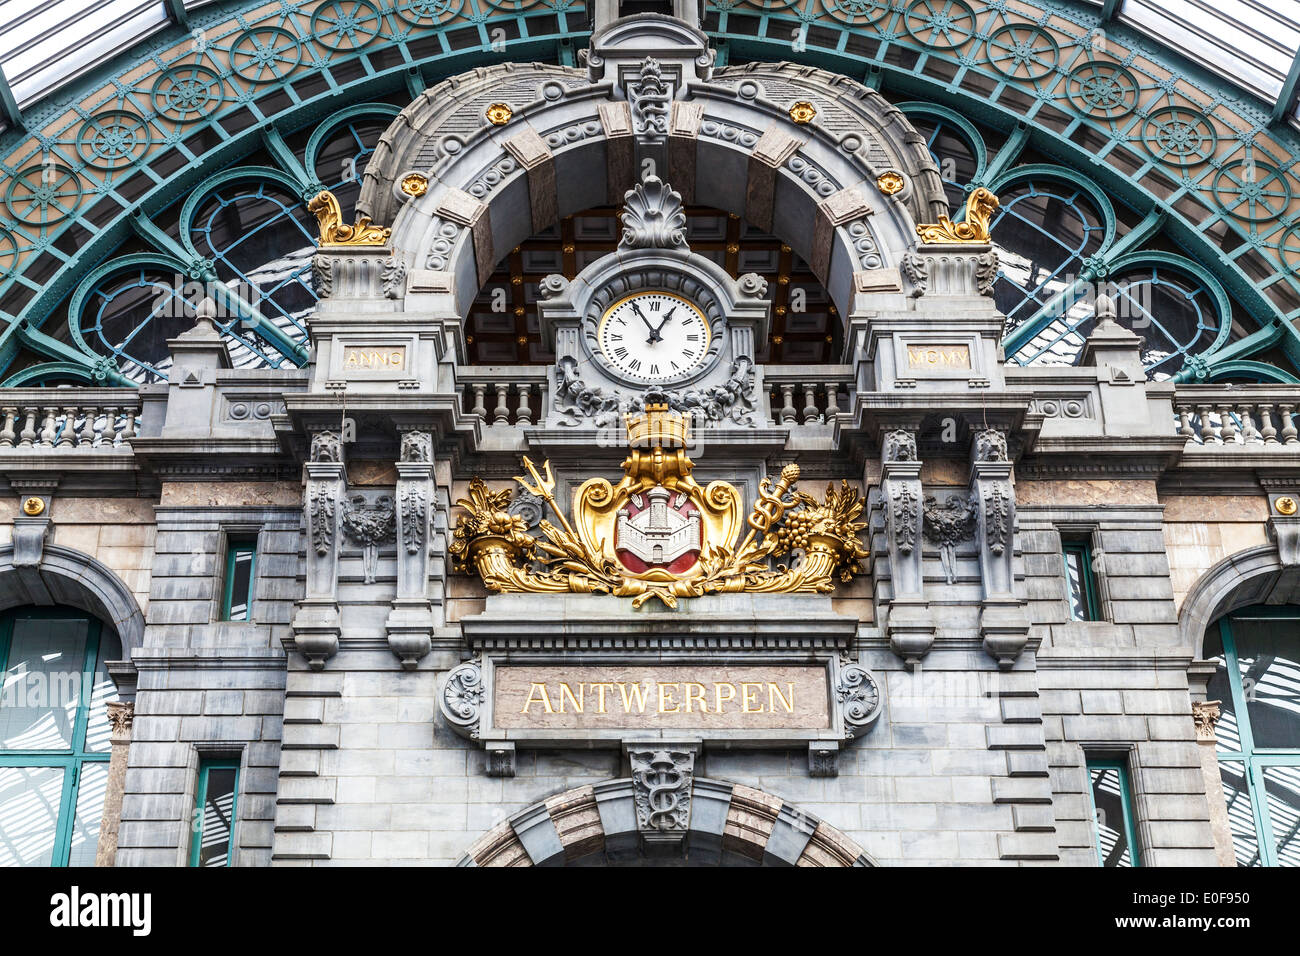 The clock above the entrance hall of the Antwerpen-Centraal railway station. Stock Photo